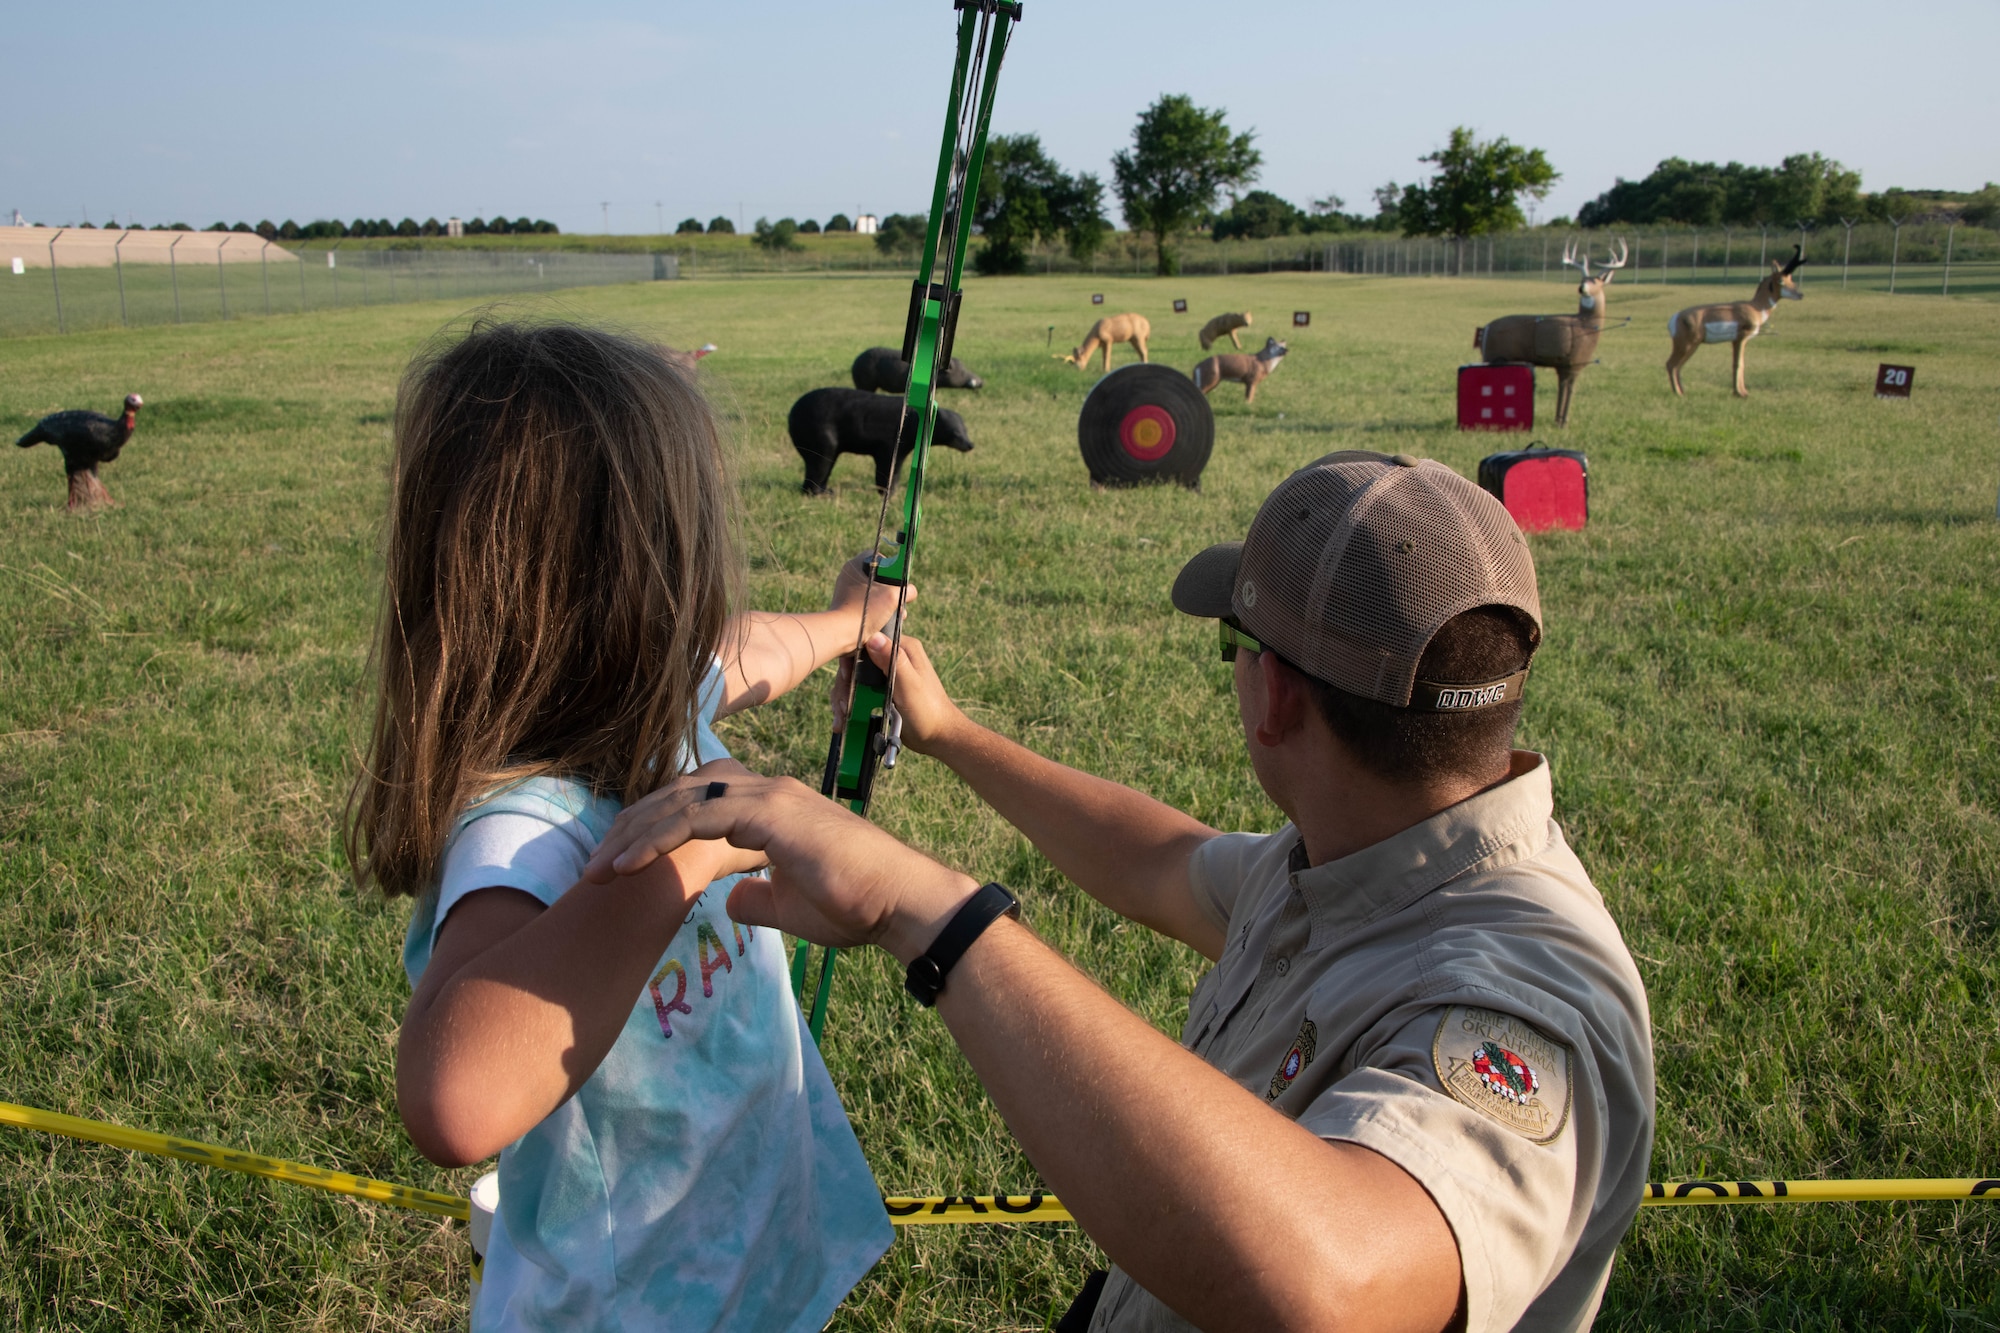 Daniel Perkins, Oklahoma Department of Wildlife Conservation state game warden helps Genevieve Allen, daughter of U.S. Air Force Master Sgt. Nathan Allen, 97th Air Mobility Wing public affairs superintendent, shoot her bow on Altus Air Force Base, Oklahoma, July 30th, 2021. Outdoor recreation supports family and individual well being, unit cohesion, and fitness through many programs and facilities on base. (U.S. Air Force photo by Airman 1st Class Trenton Jancze)